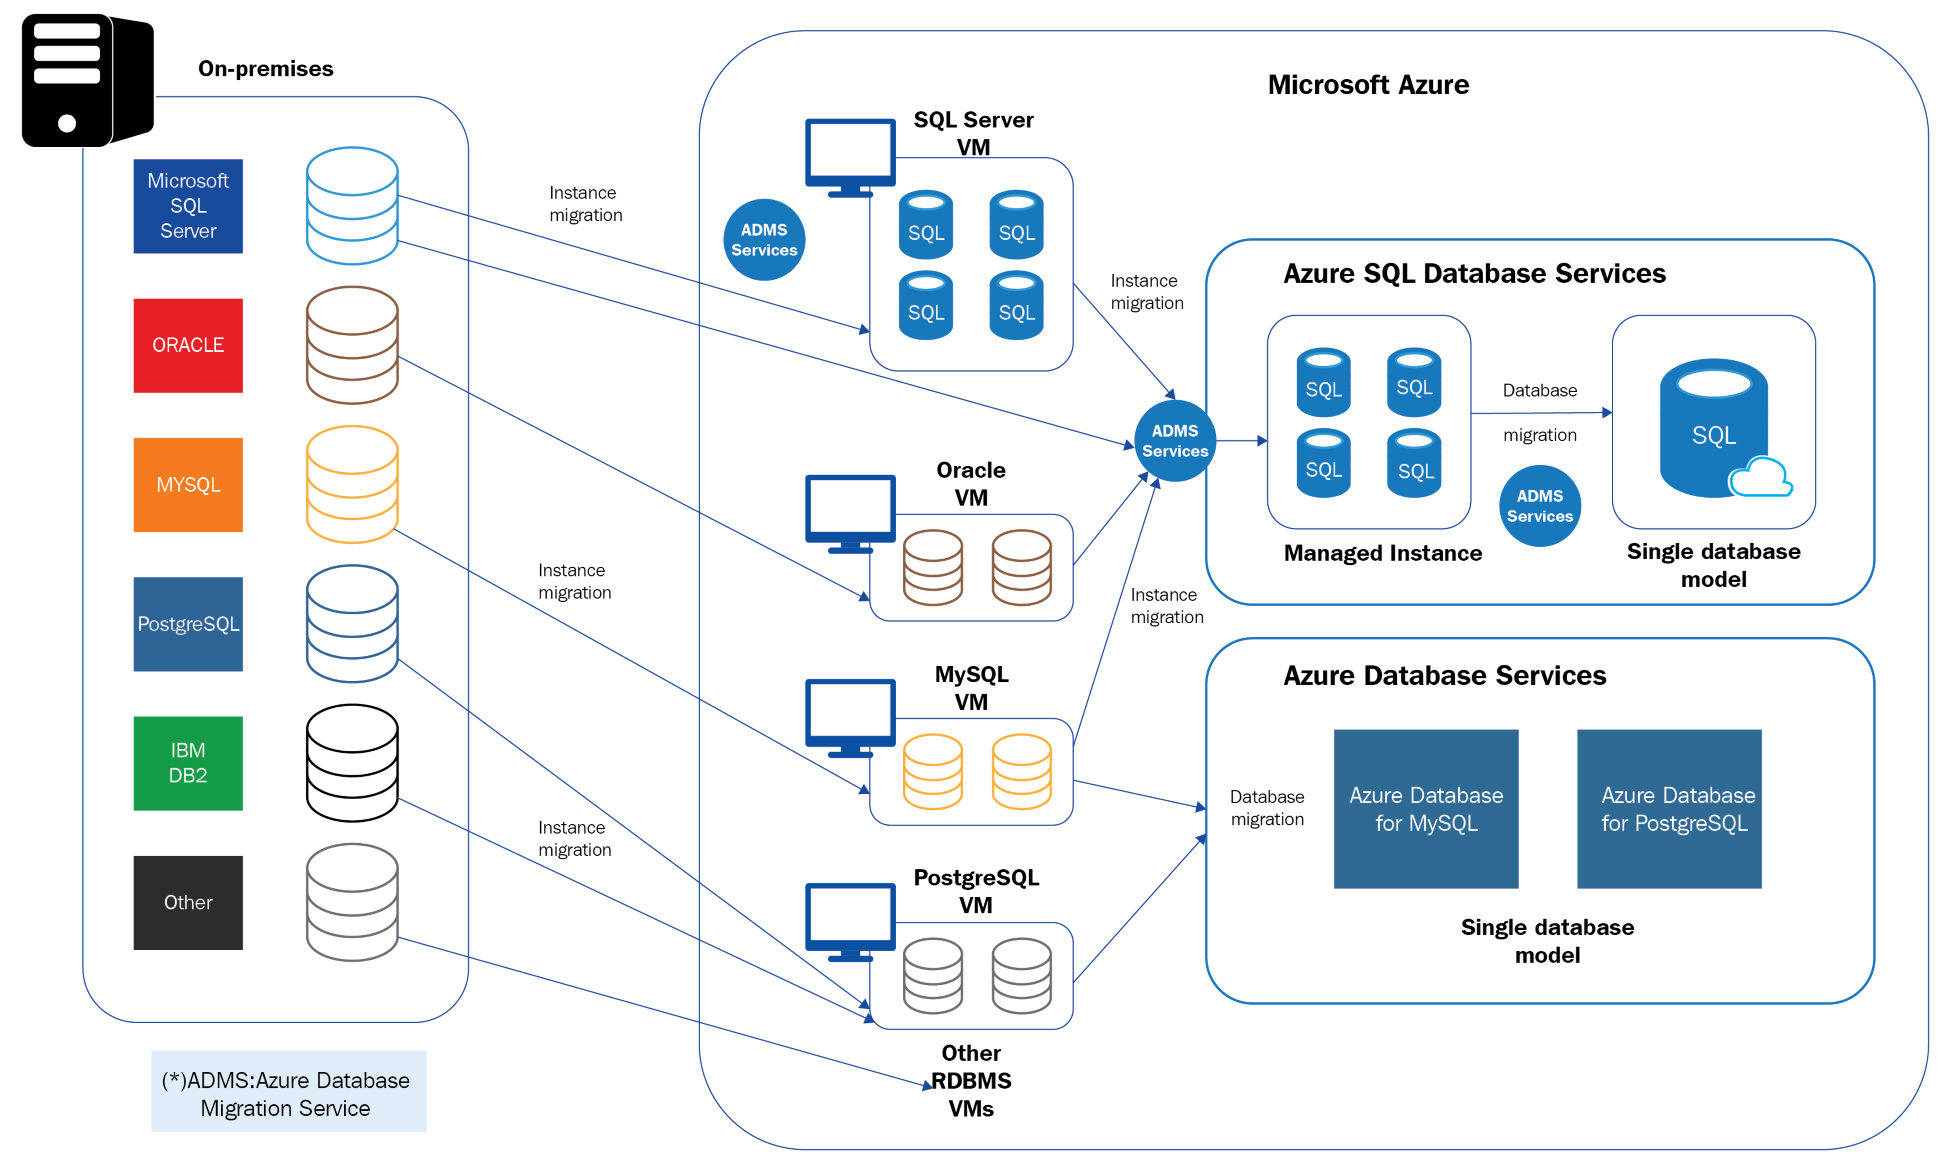 A diagram of a multicloud architecture with multiple clouds each with its own set of services and a broker in the middle to facilitate communication between the two clouds. The diagram shows how data can be migrated from on-premises or other clouds to Azure SQL Database using Azure Database Migration Service.